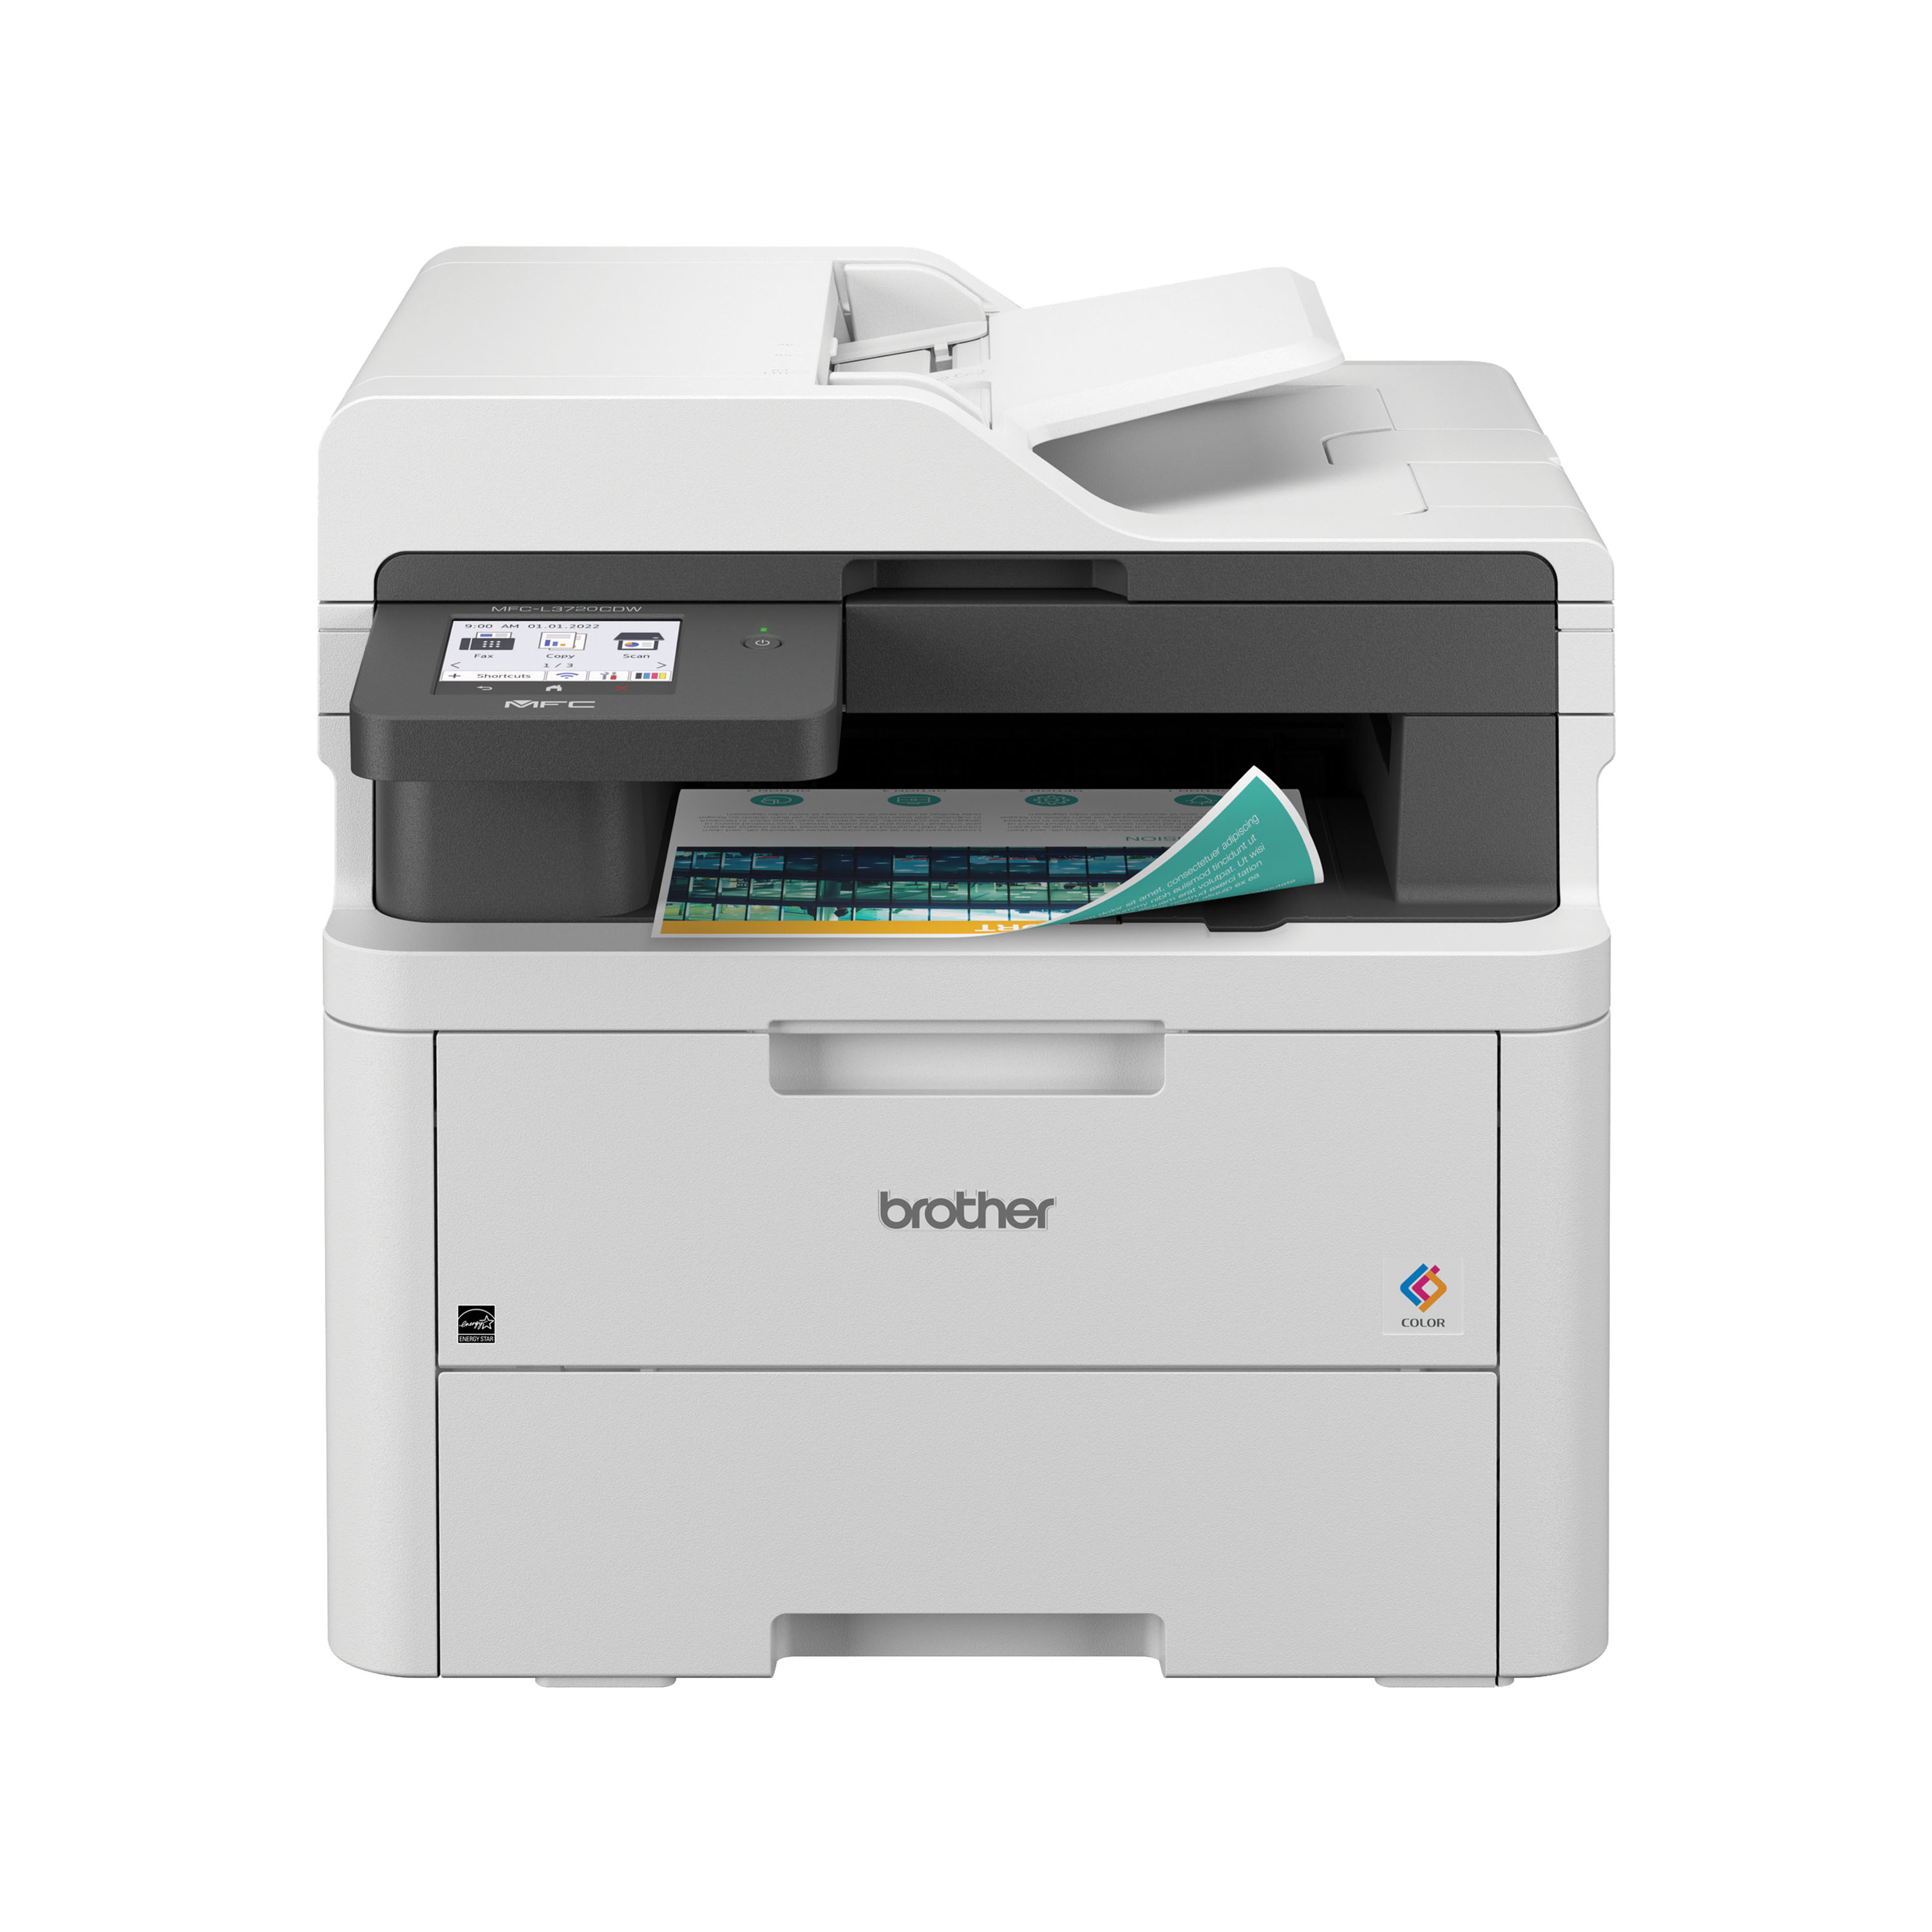 

Brother Digital Color All-in-One Printer with Copy, Scan and Fax, Duplex and Mobile Printing, Refresh Subscription Ready